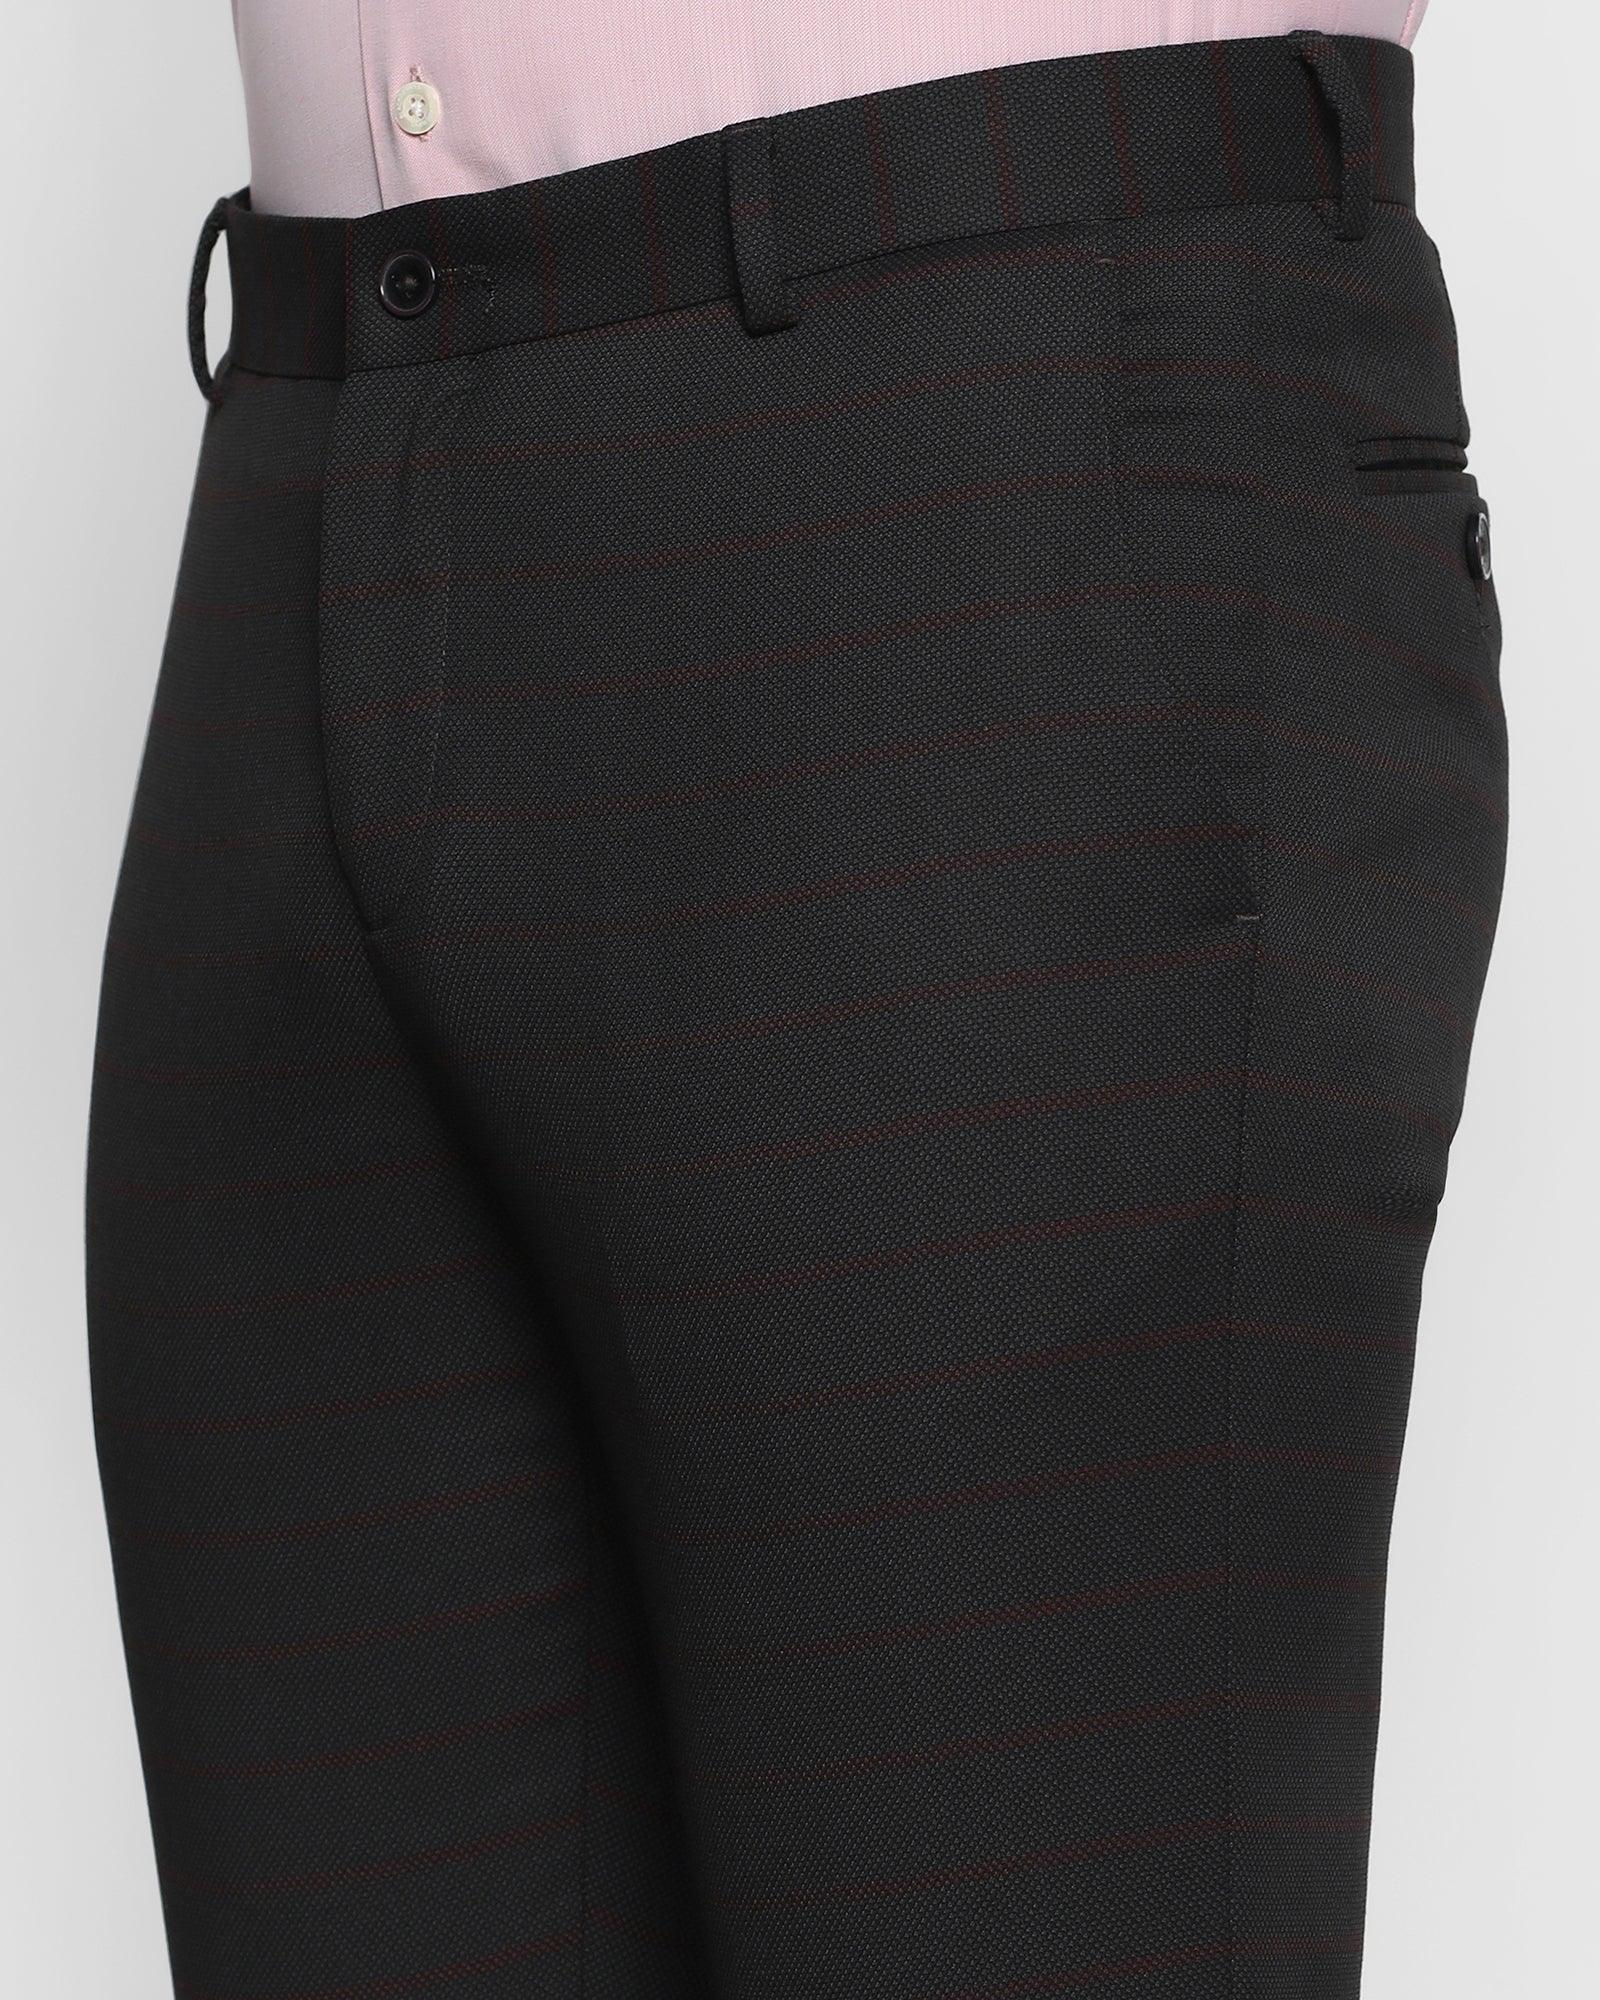 Slim Fit B-91 Formal Charcoal Striped Trouser - Kenner